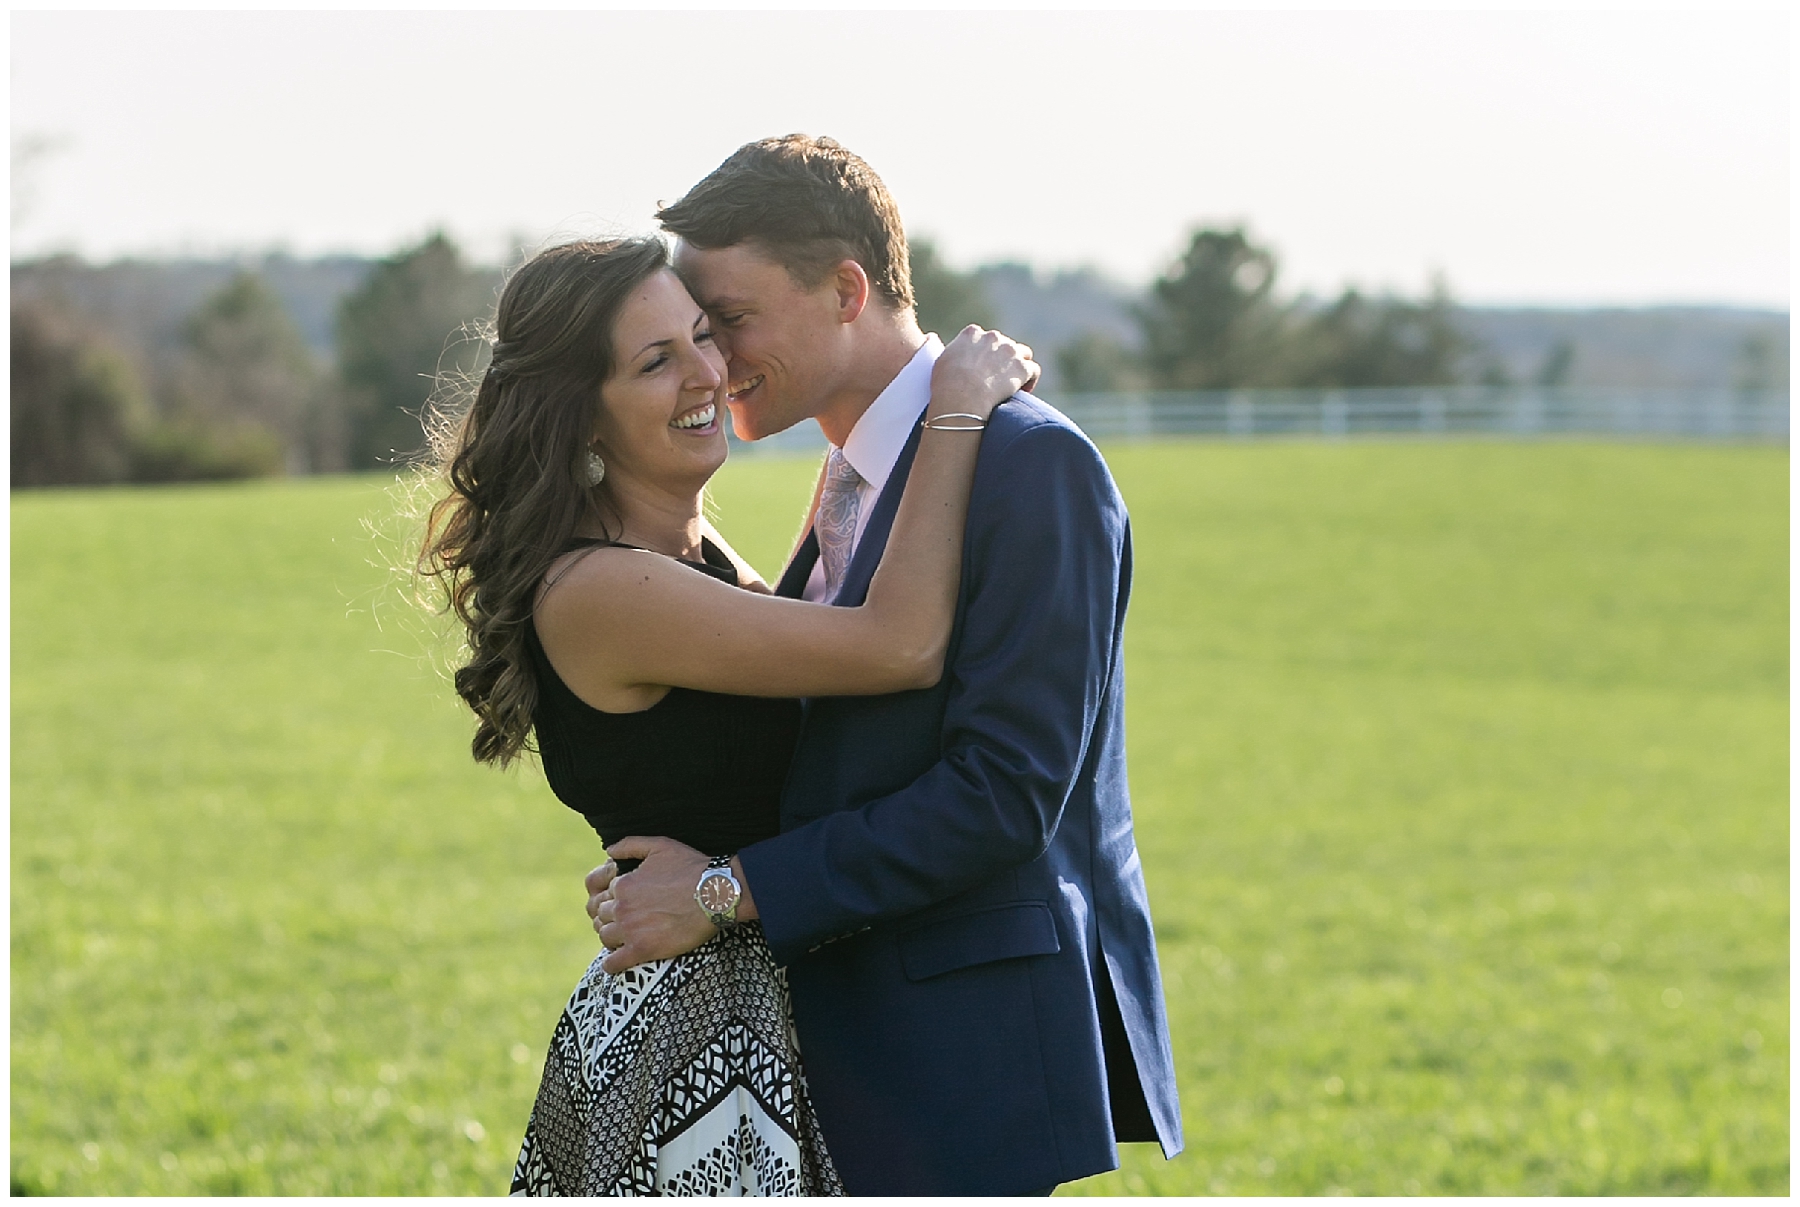 Chelsea Phil Private Estate Engagement Living Radiant Photography photos color_0002.jpg